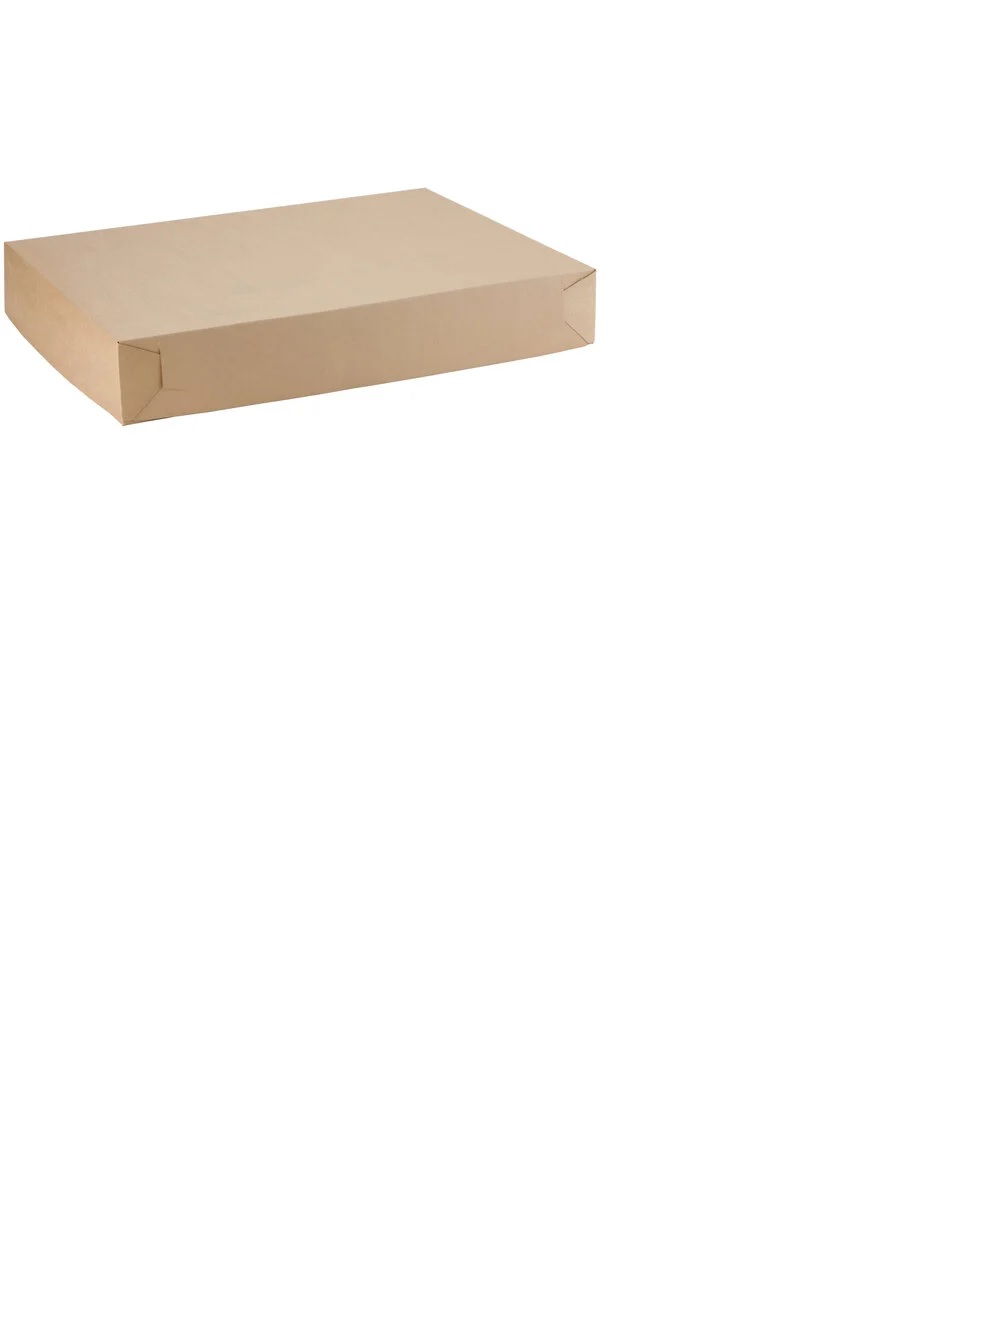 Boxes Full Sheet Kraft 26.5X18.5X4 25ct (D) - Sold by PACK